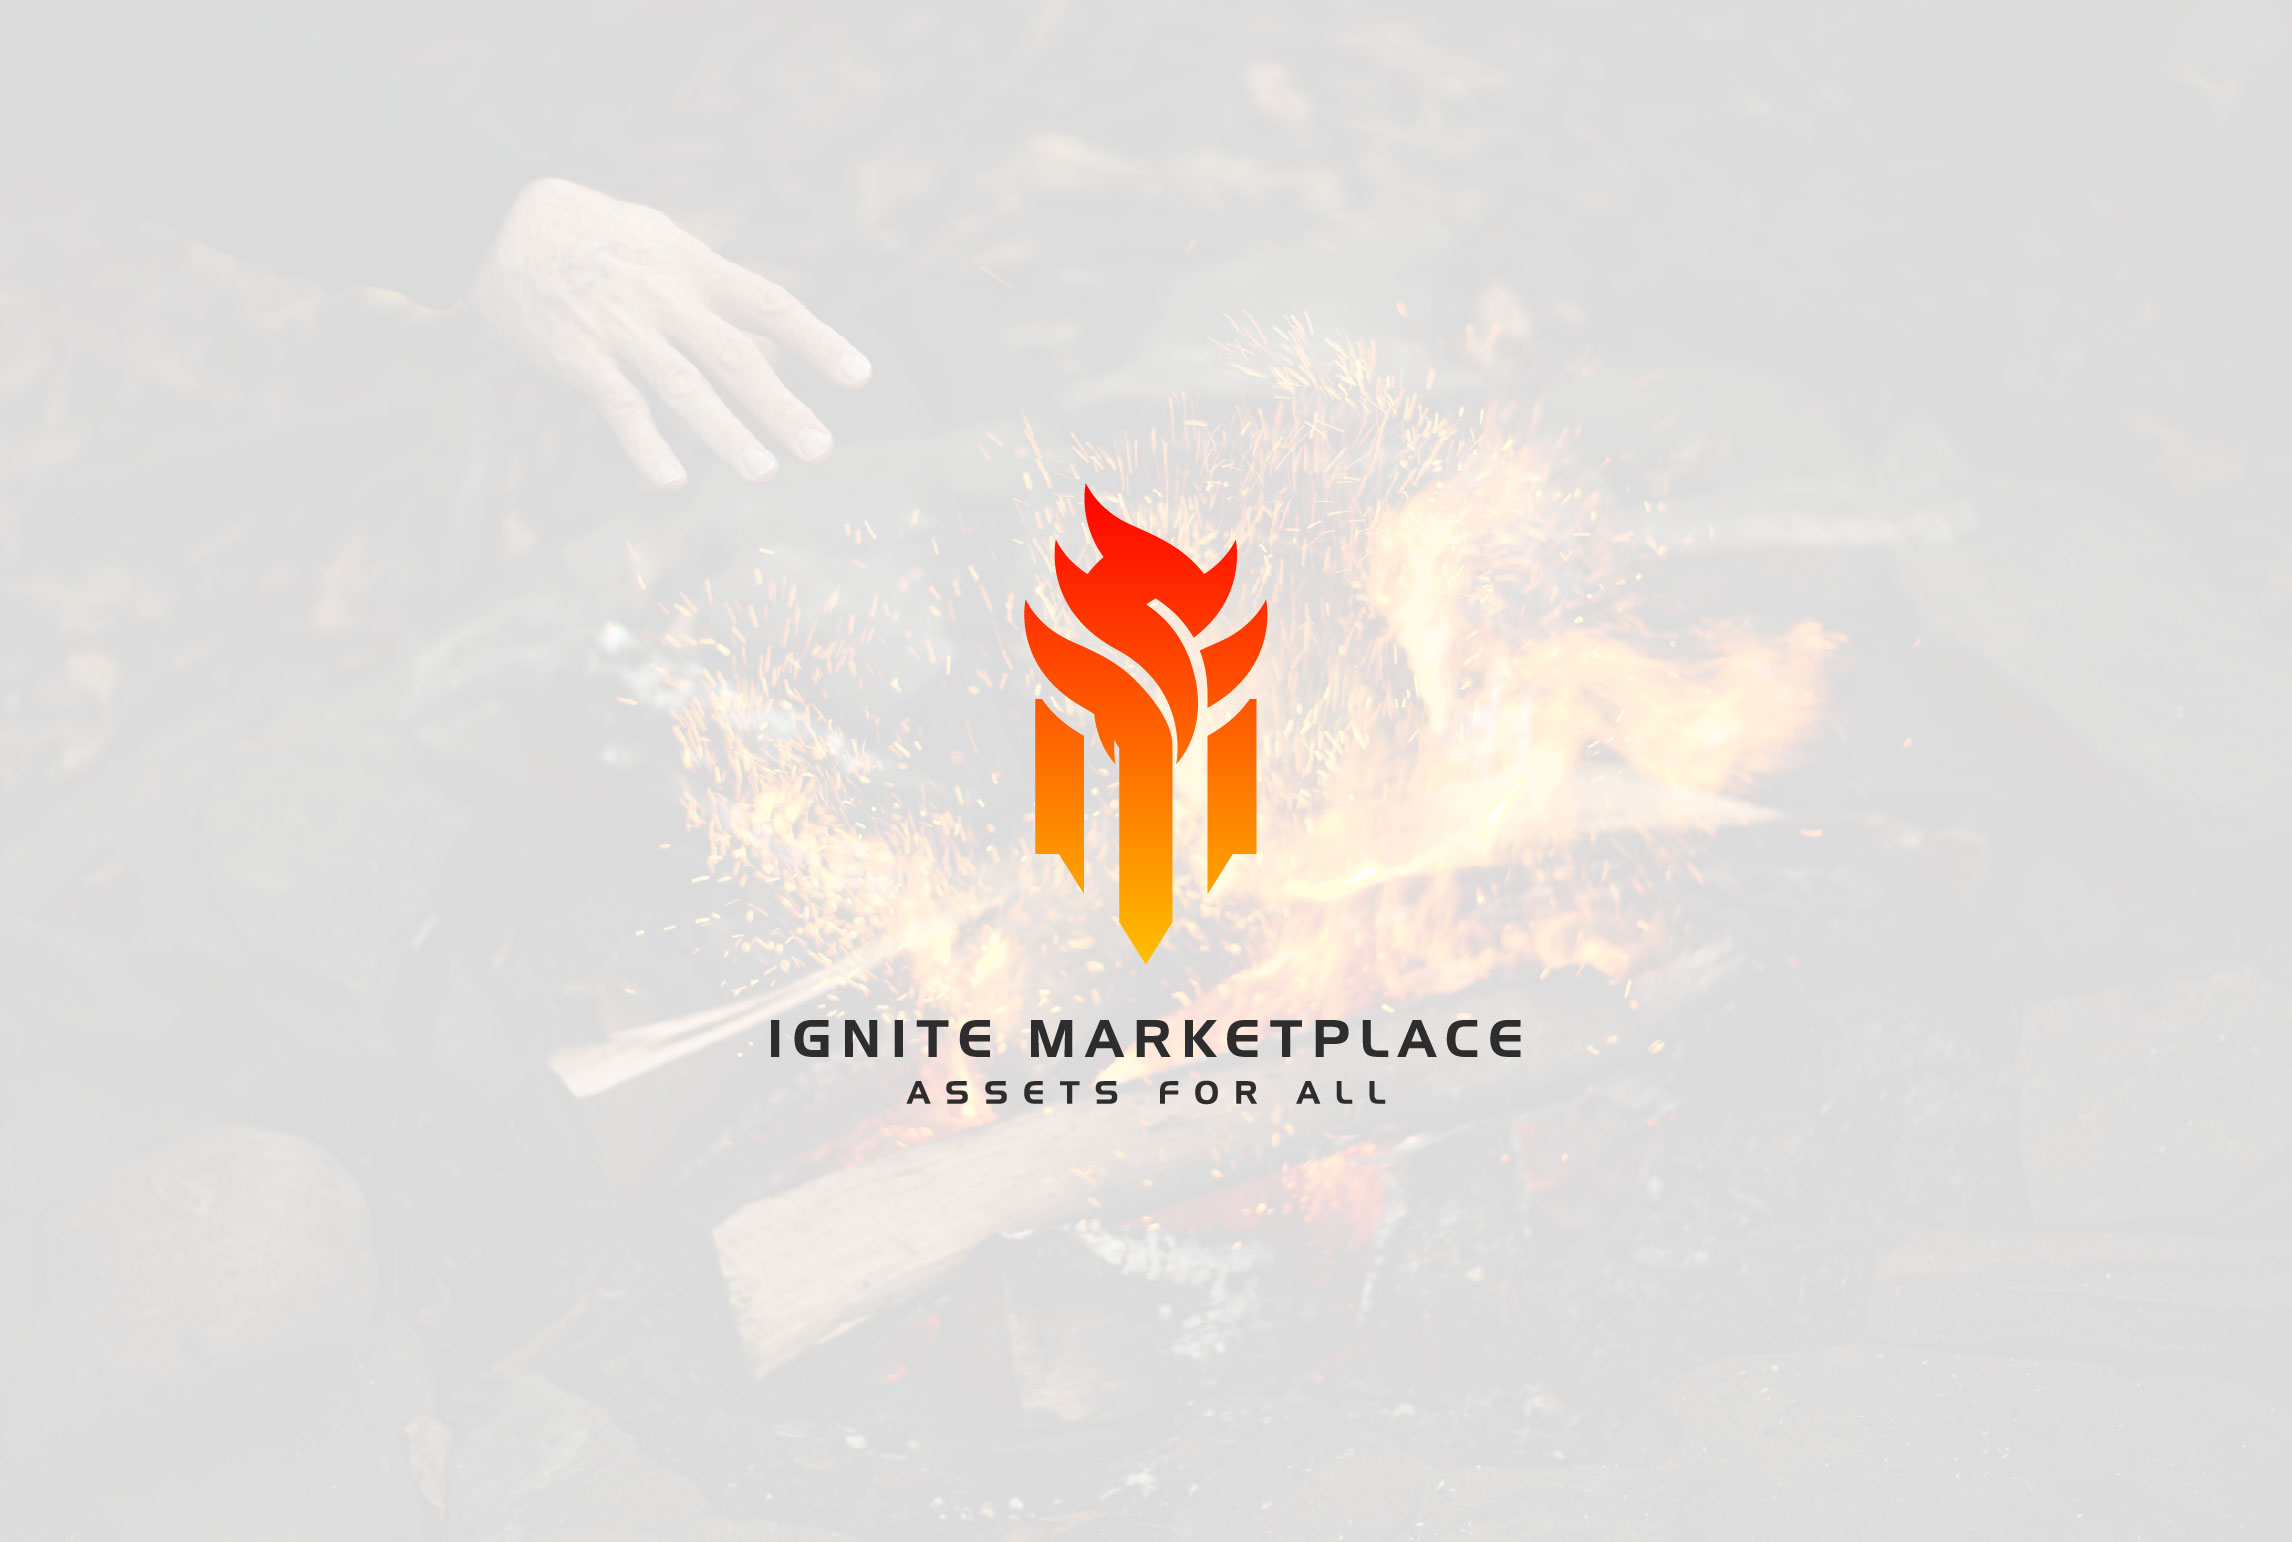 16-year-old Evan Gassman Launches Ignite Marketplace For Art-related Products